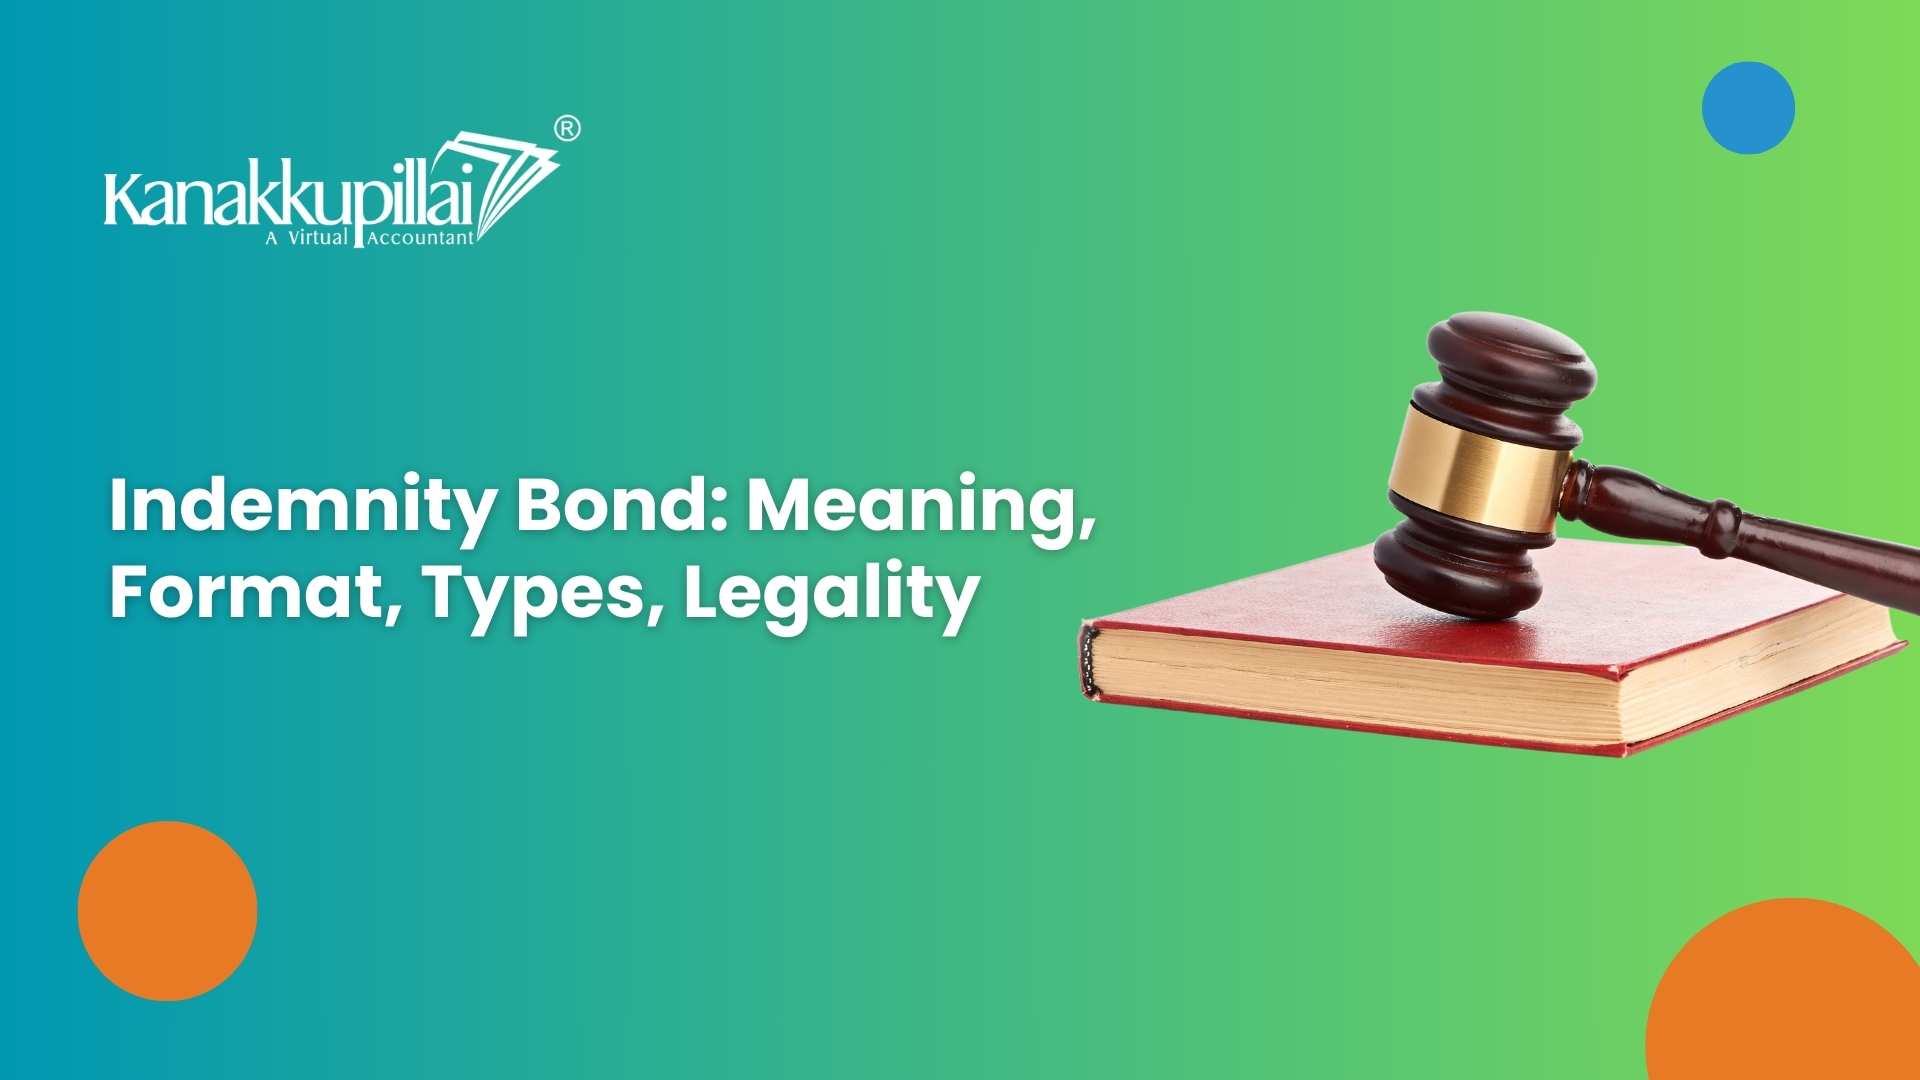 You are currently viewing Indemnity Bond: Meaning, Format, Types, Legality